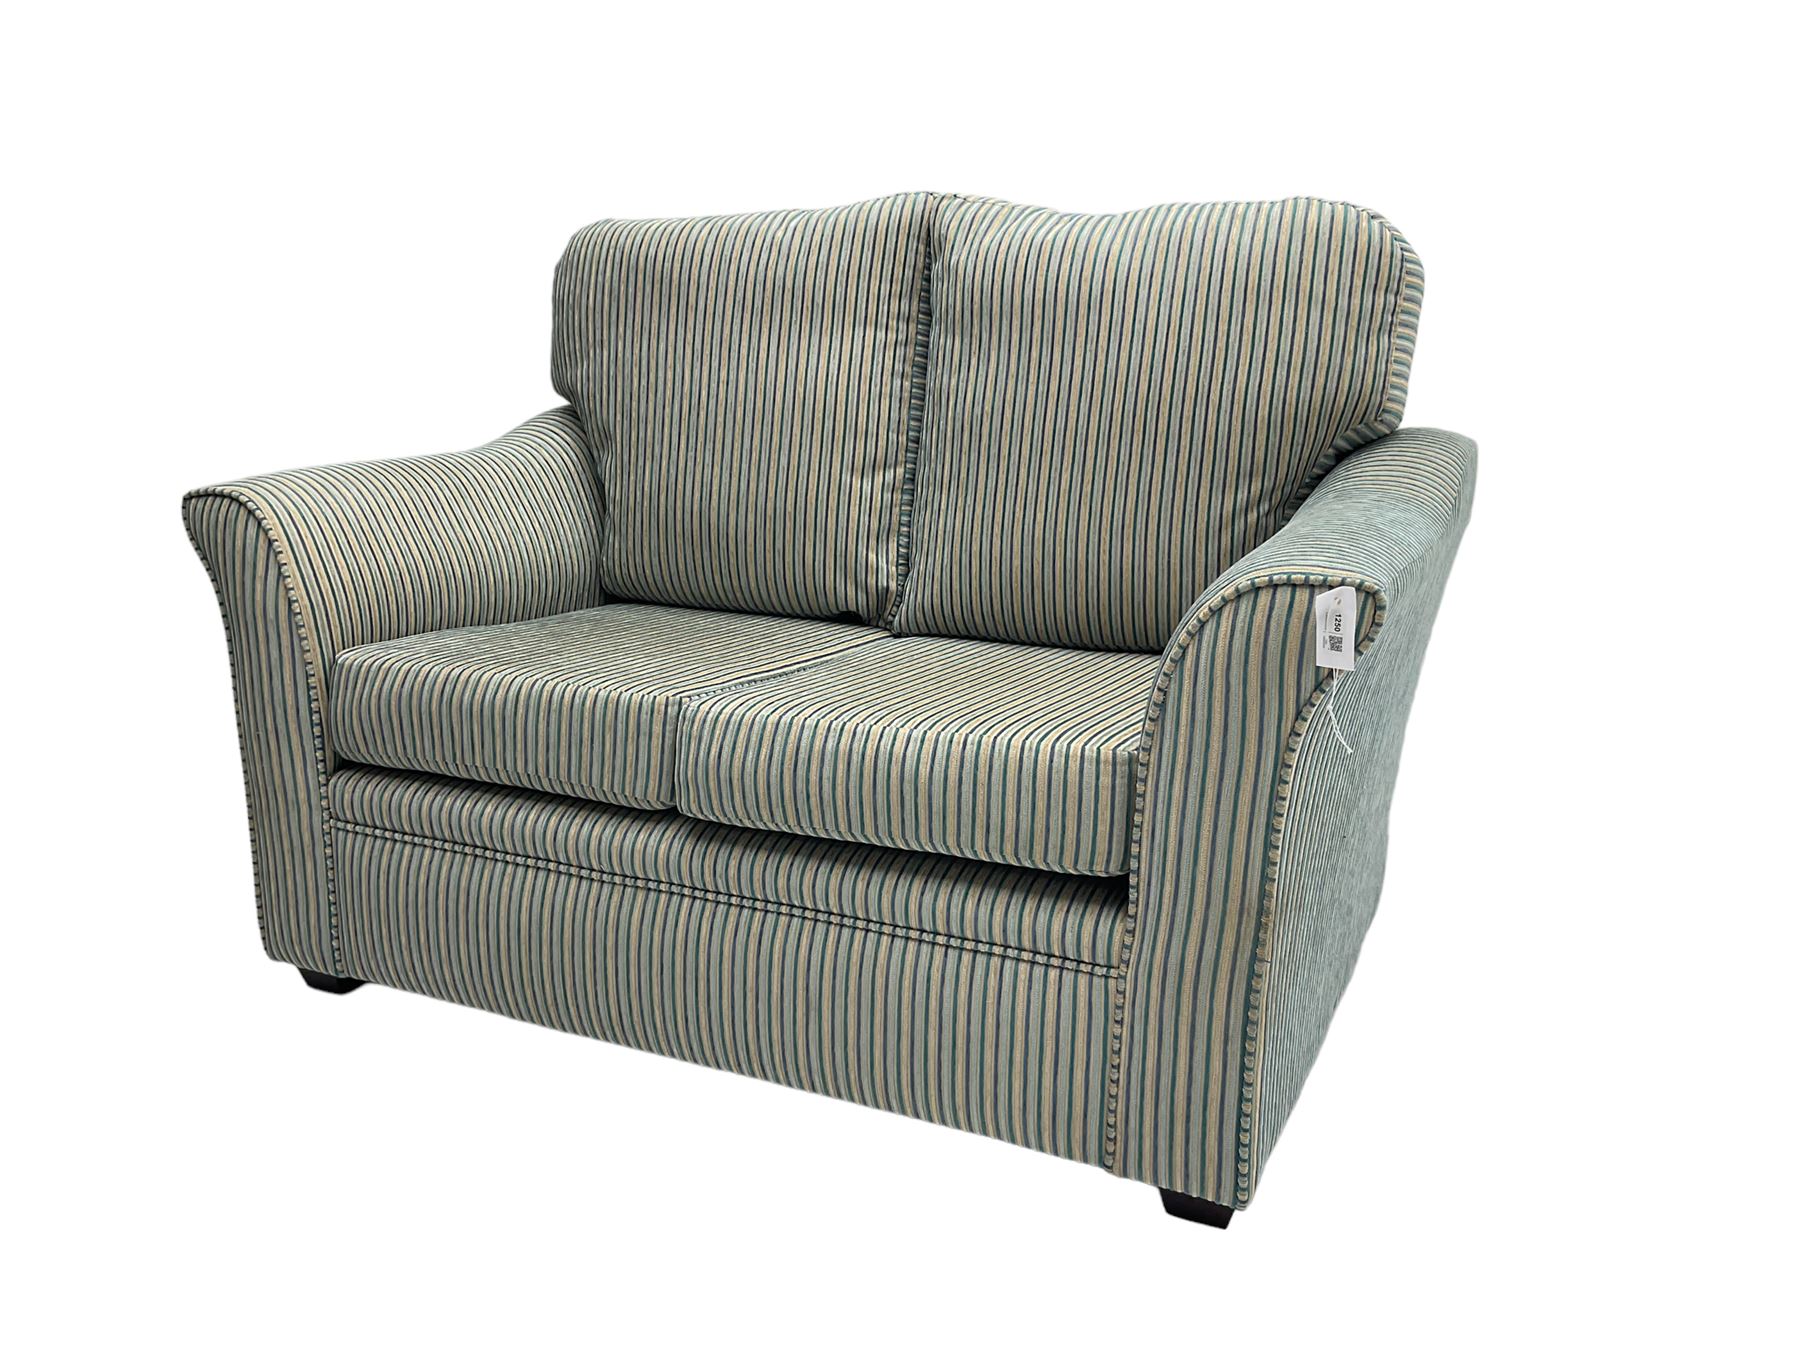 Two seater sofa - Image 3 of 4